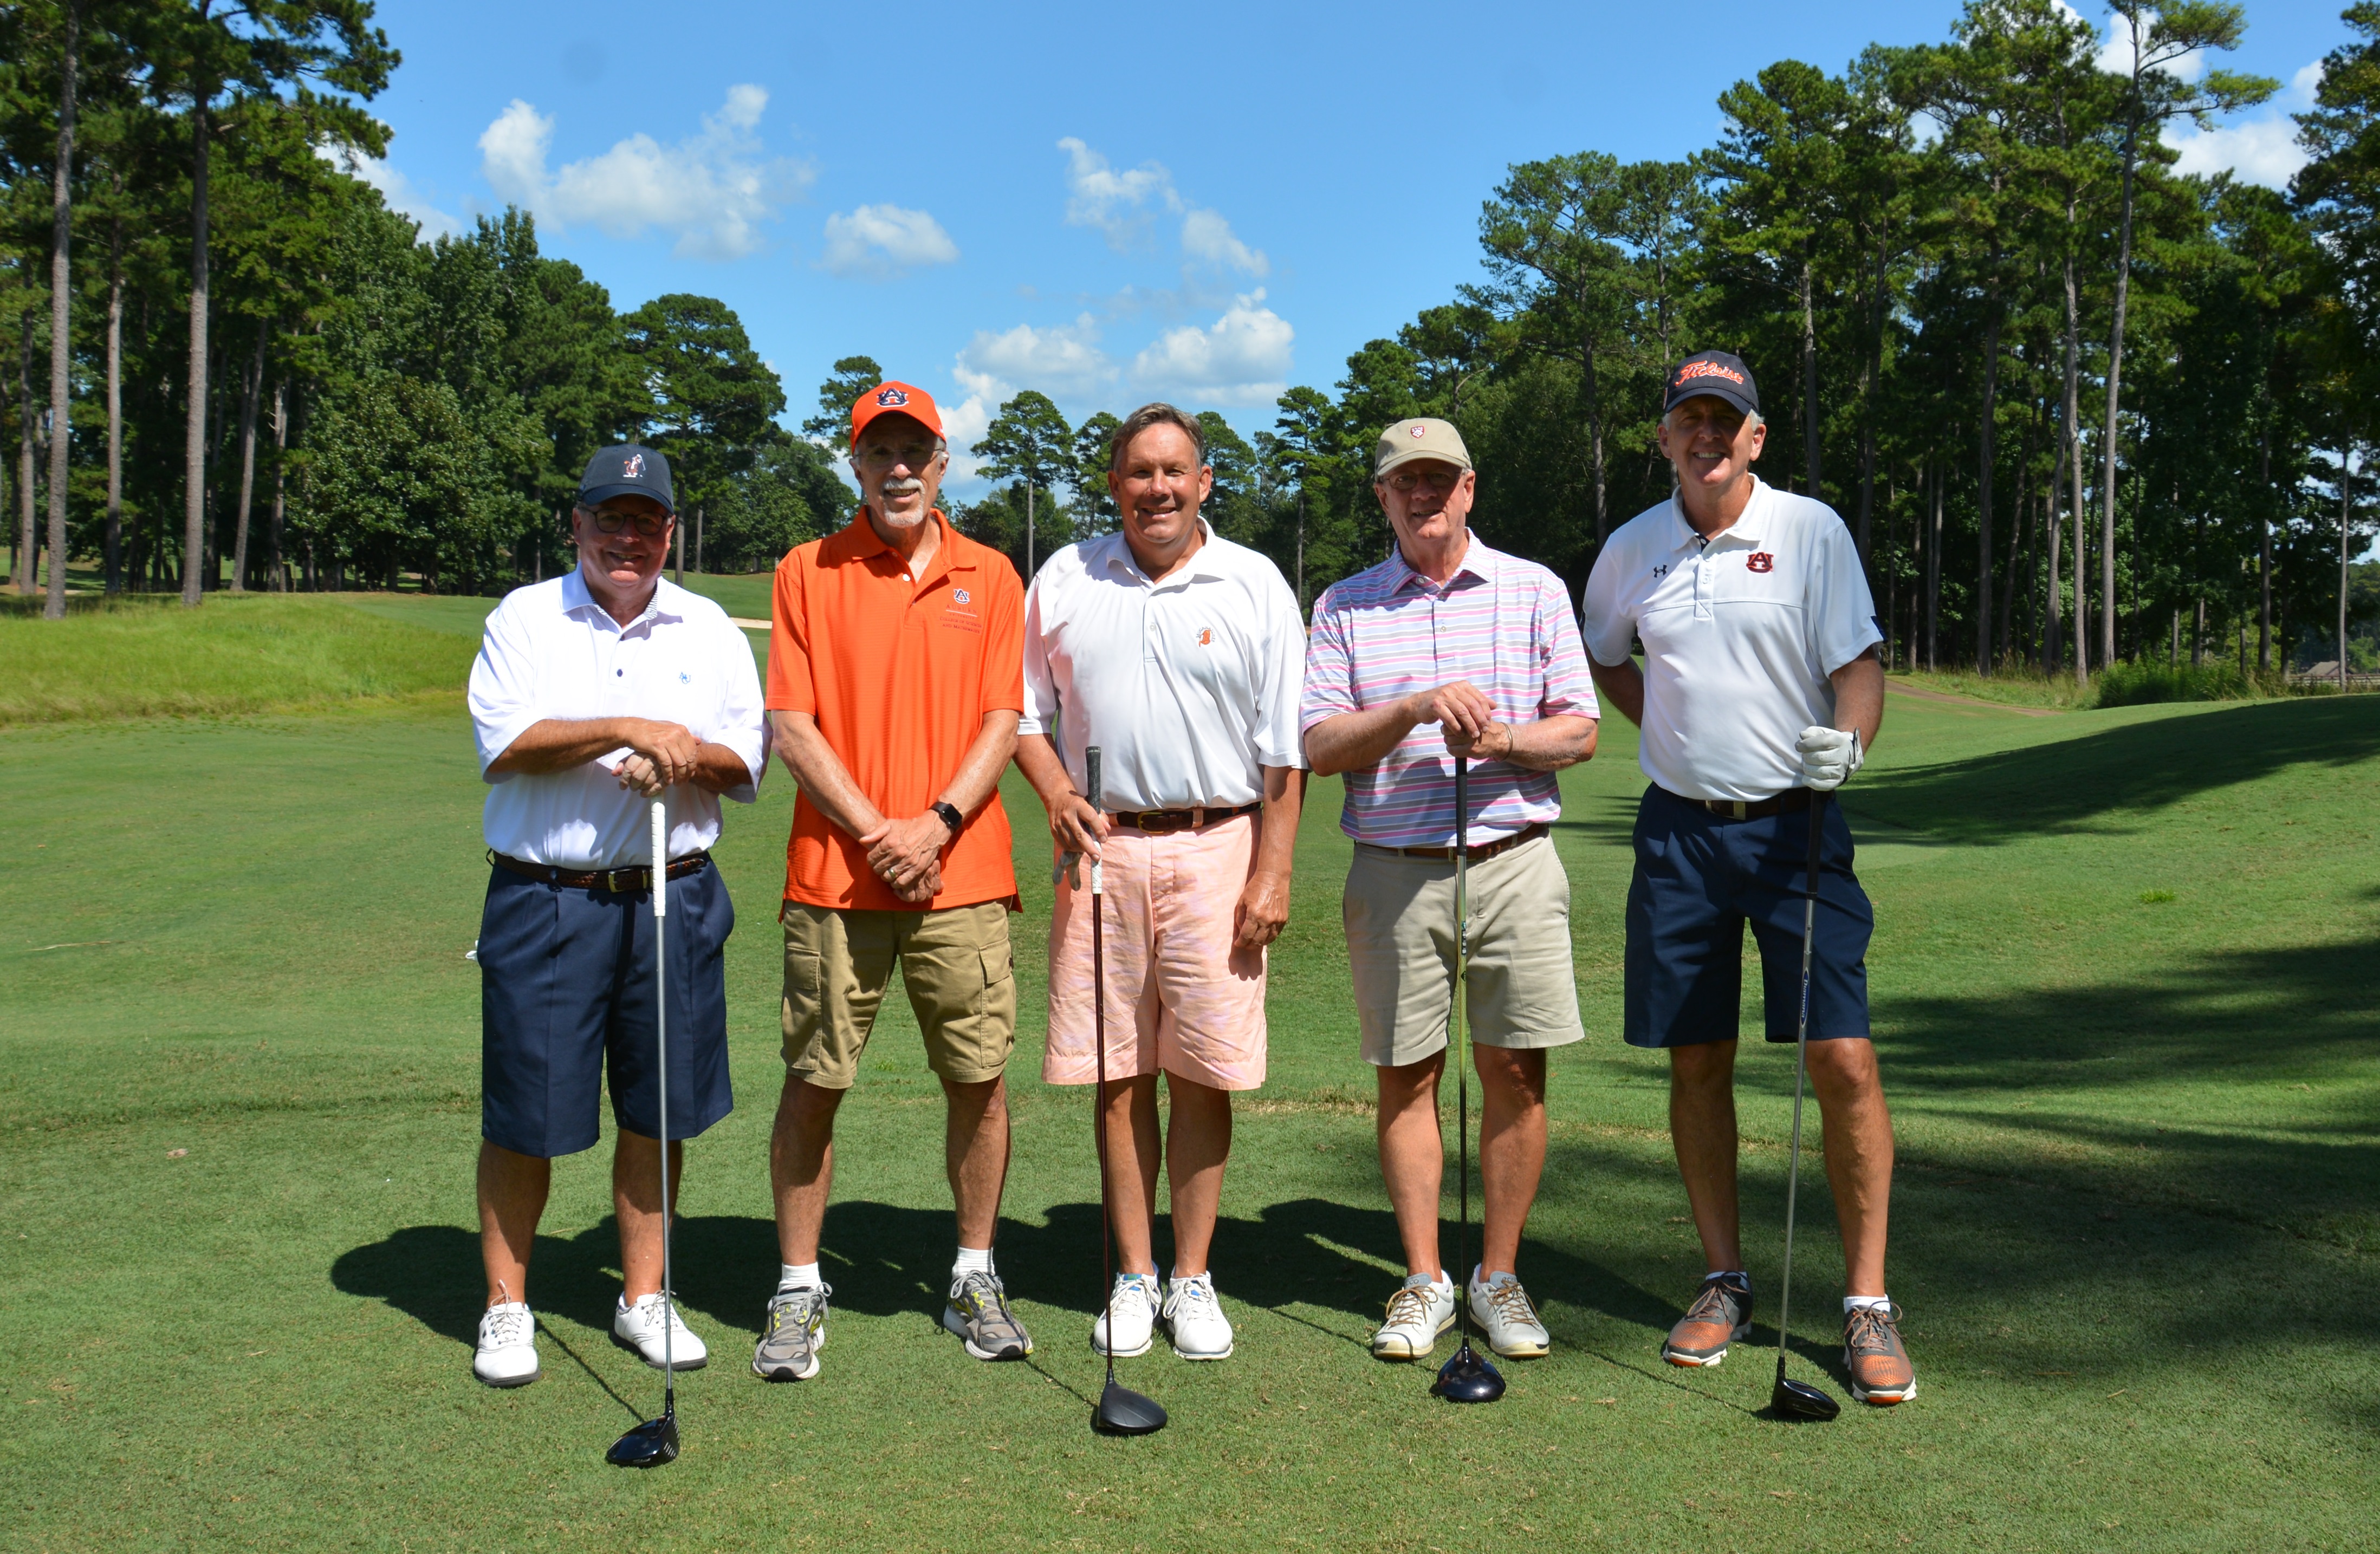  Auburn Alumni, Students and Community Members Tee Off at the 23rd Annual Dean’s Scholarship Golf Classic